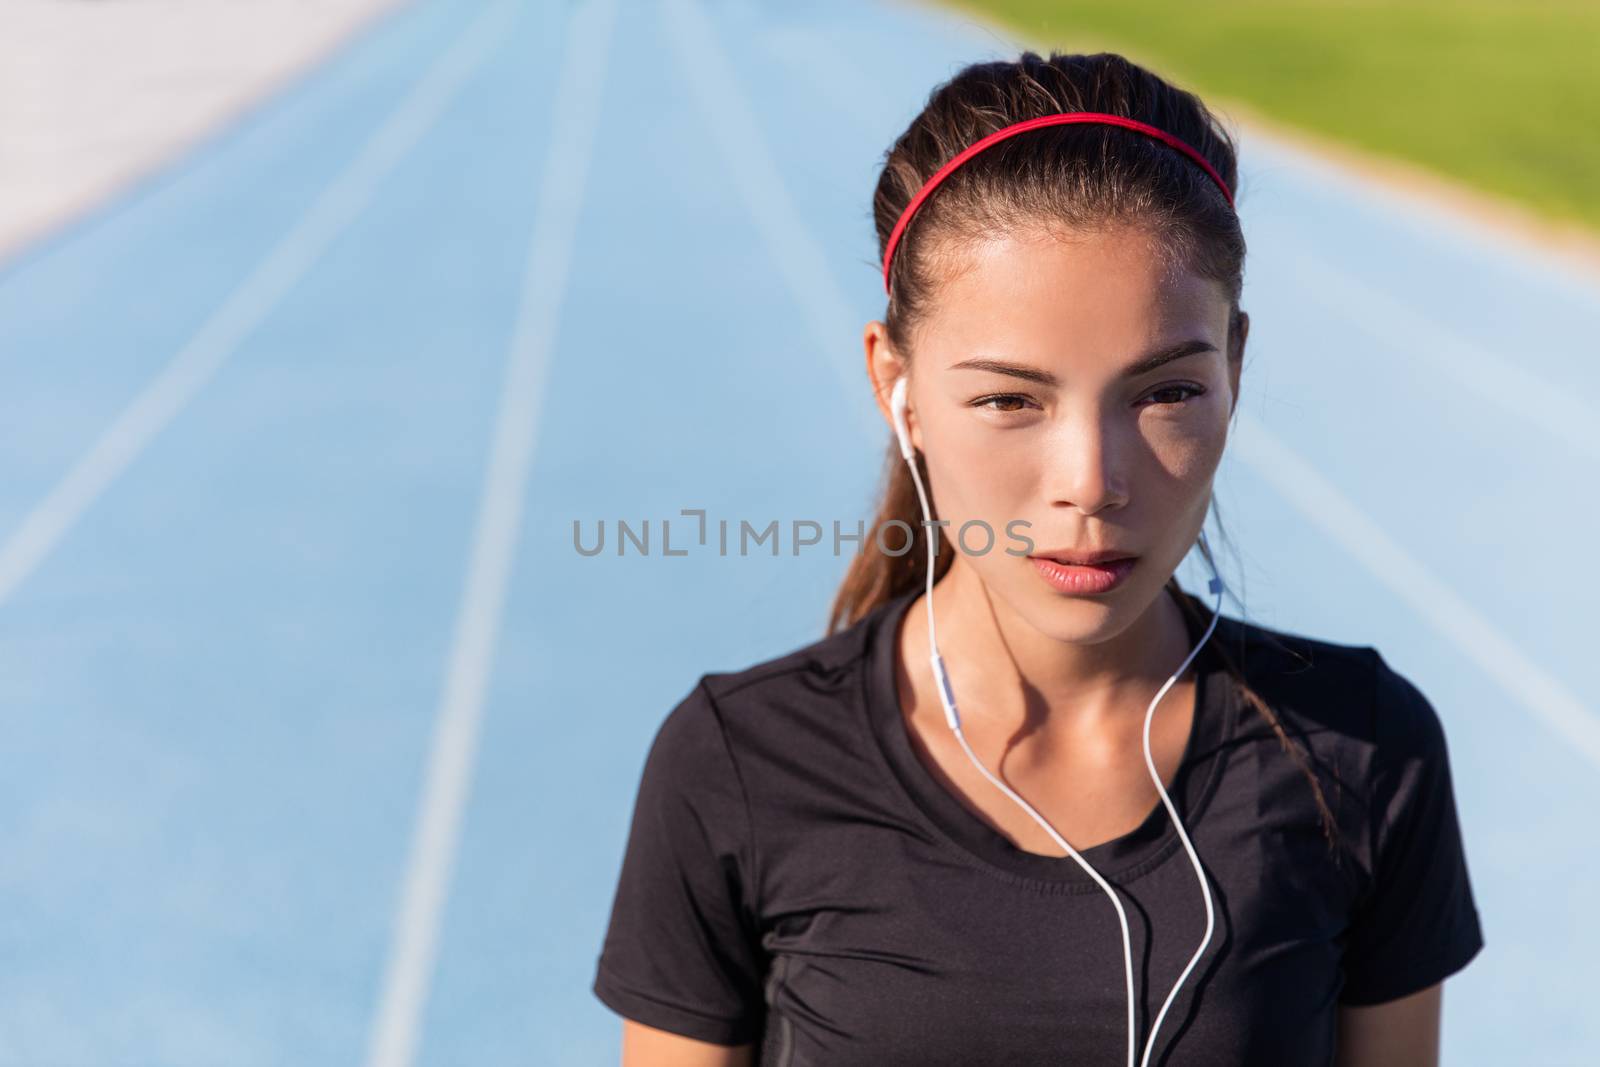 Runner woman listening to music with earphones for running motivation getting ready to race. Asian female athlete training focus, determination and cardio on athletic tracks at stadium.